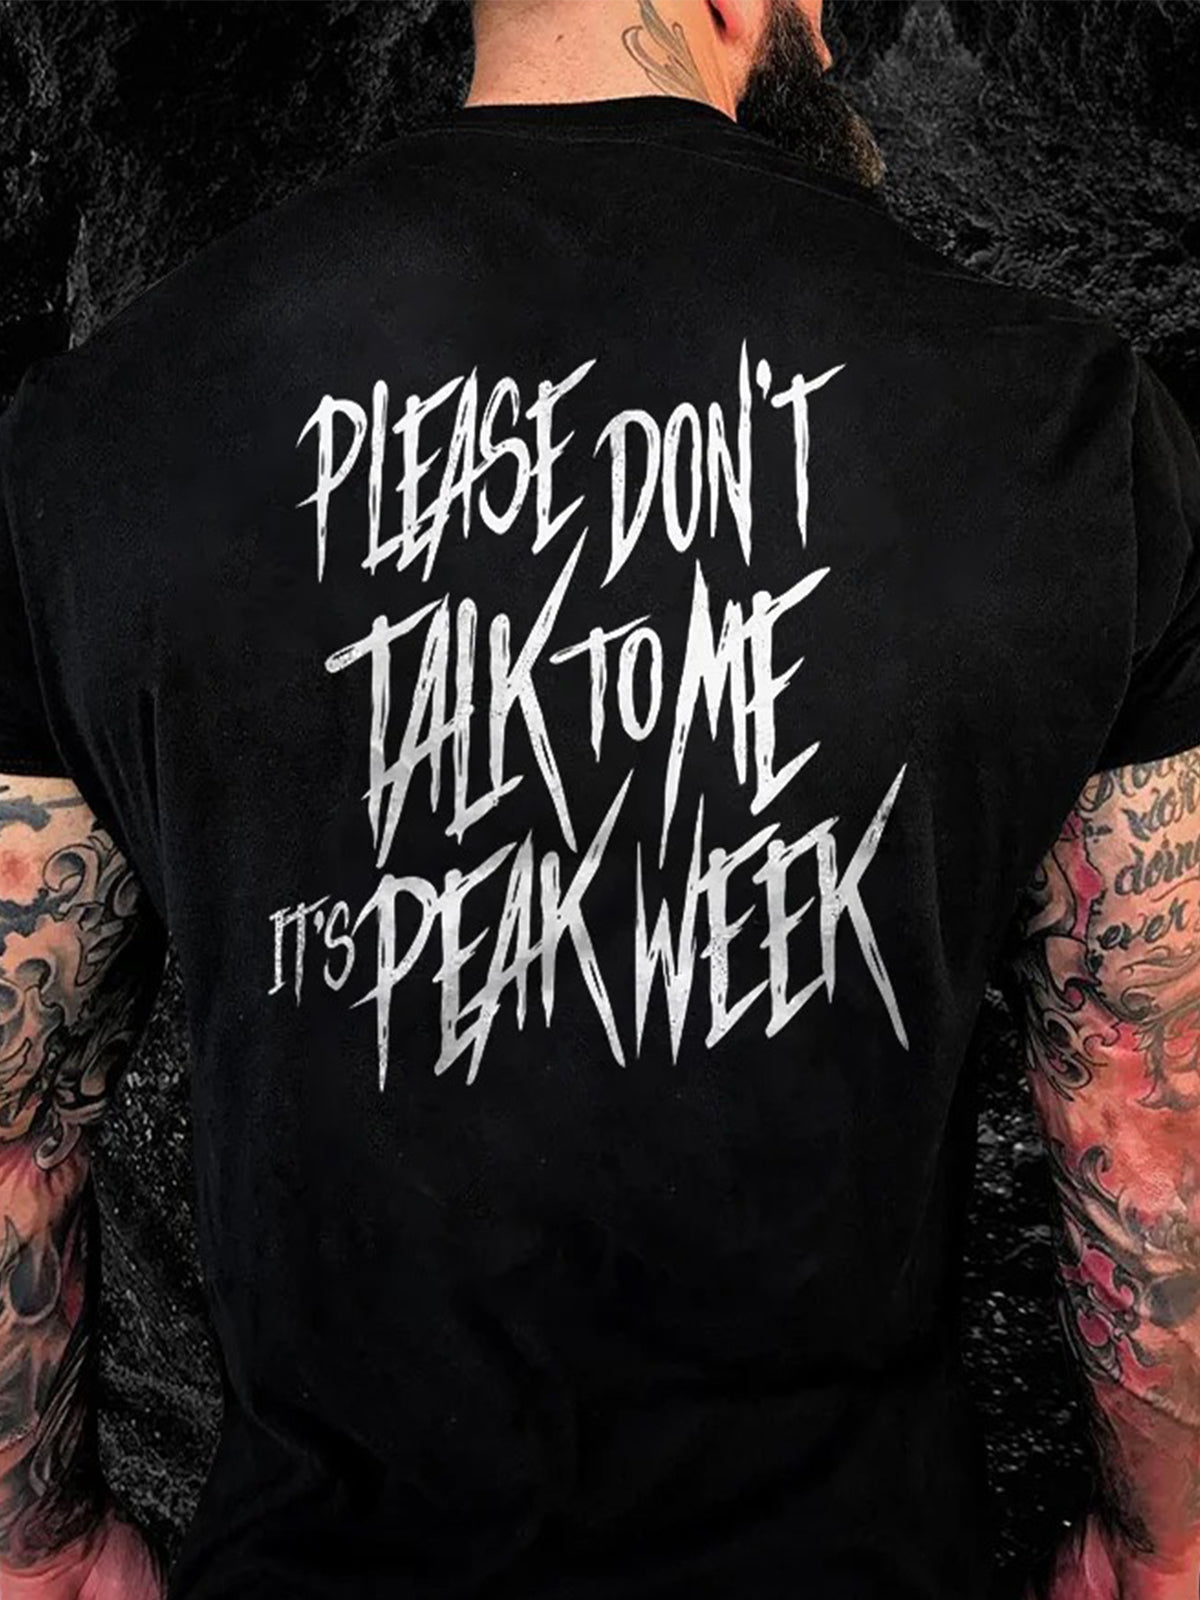 Please Don't Talk To Me Printed Round Neck Short Sleeve Men's T-shirt